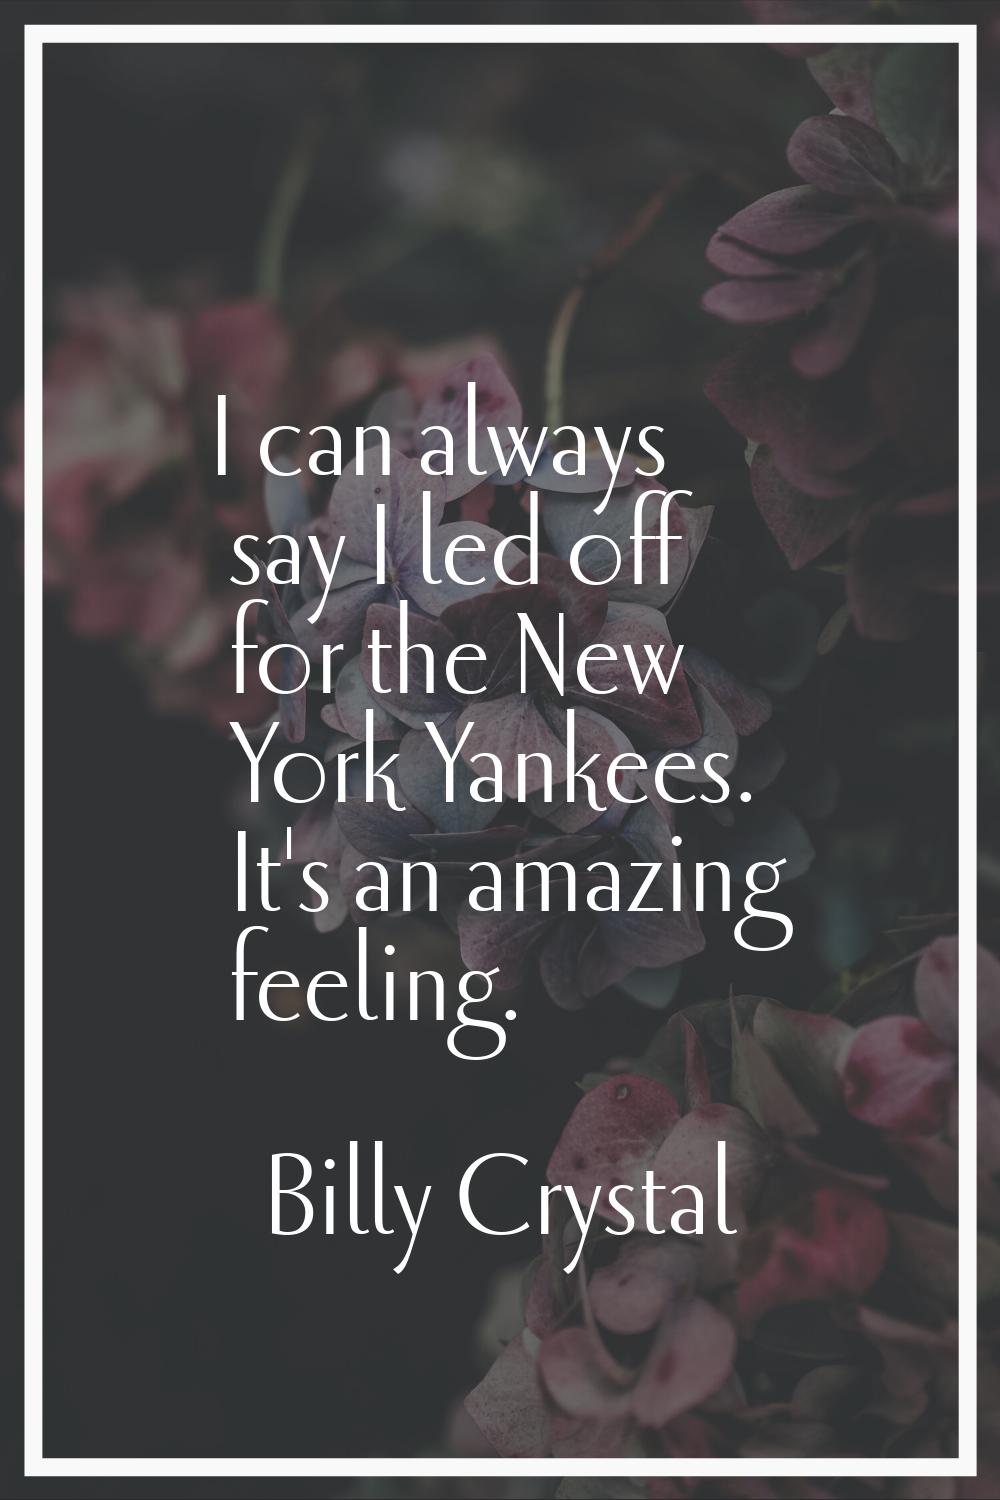 I can always say I led off for the New York Yankees. It's an amazing feeling.